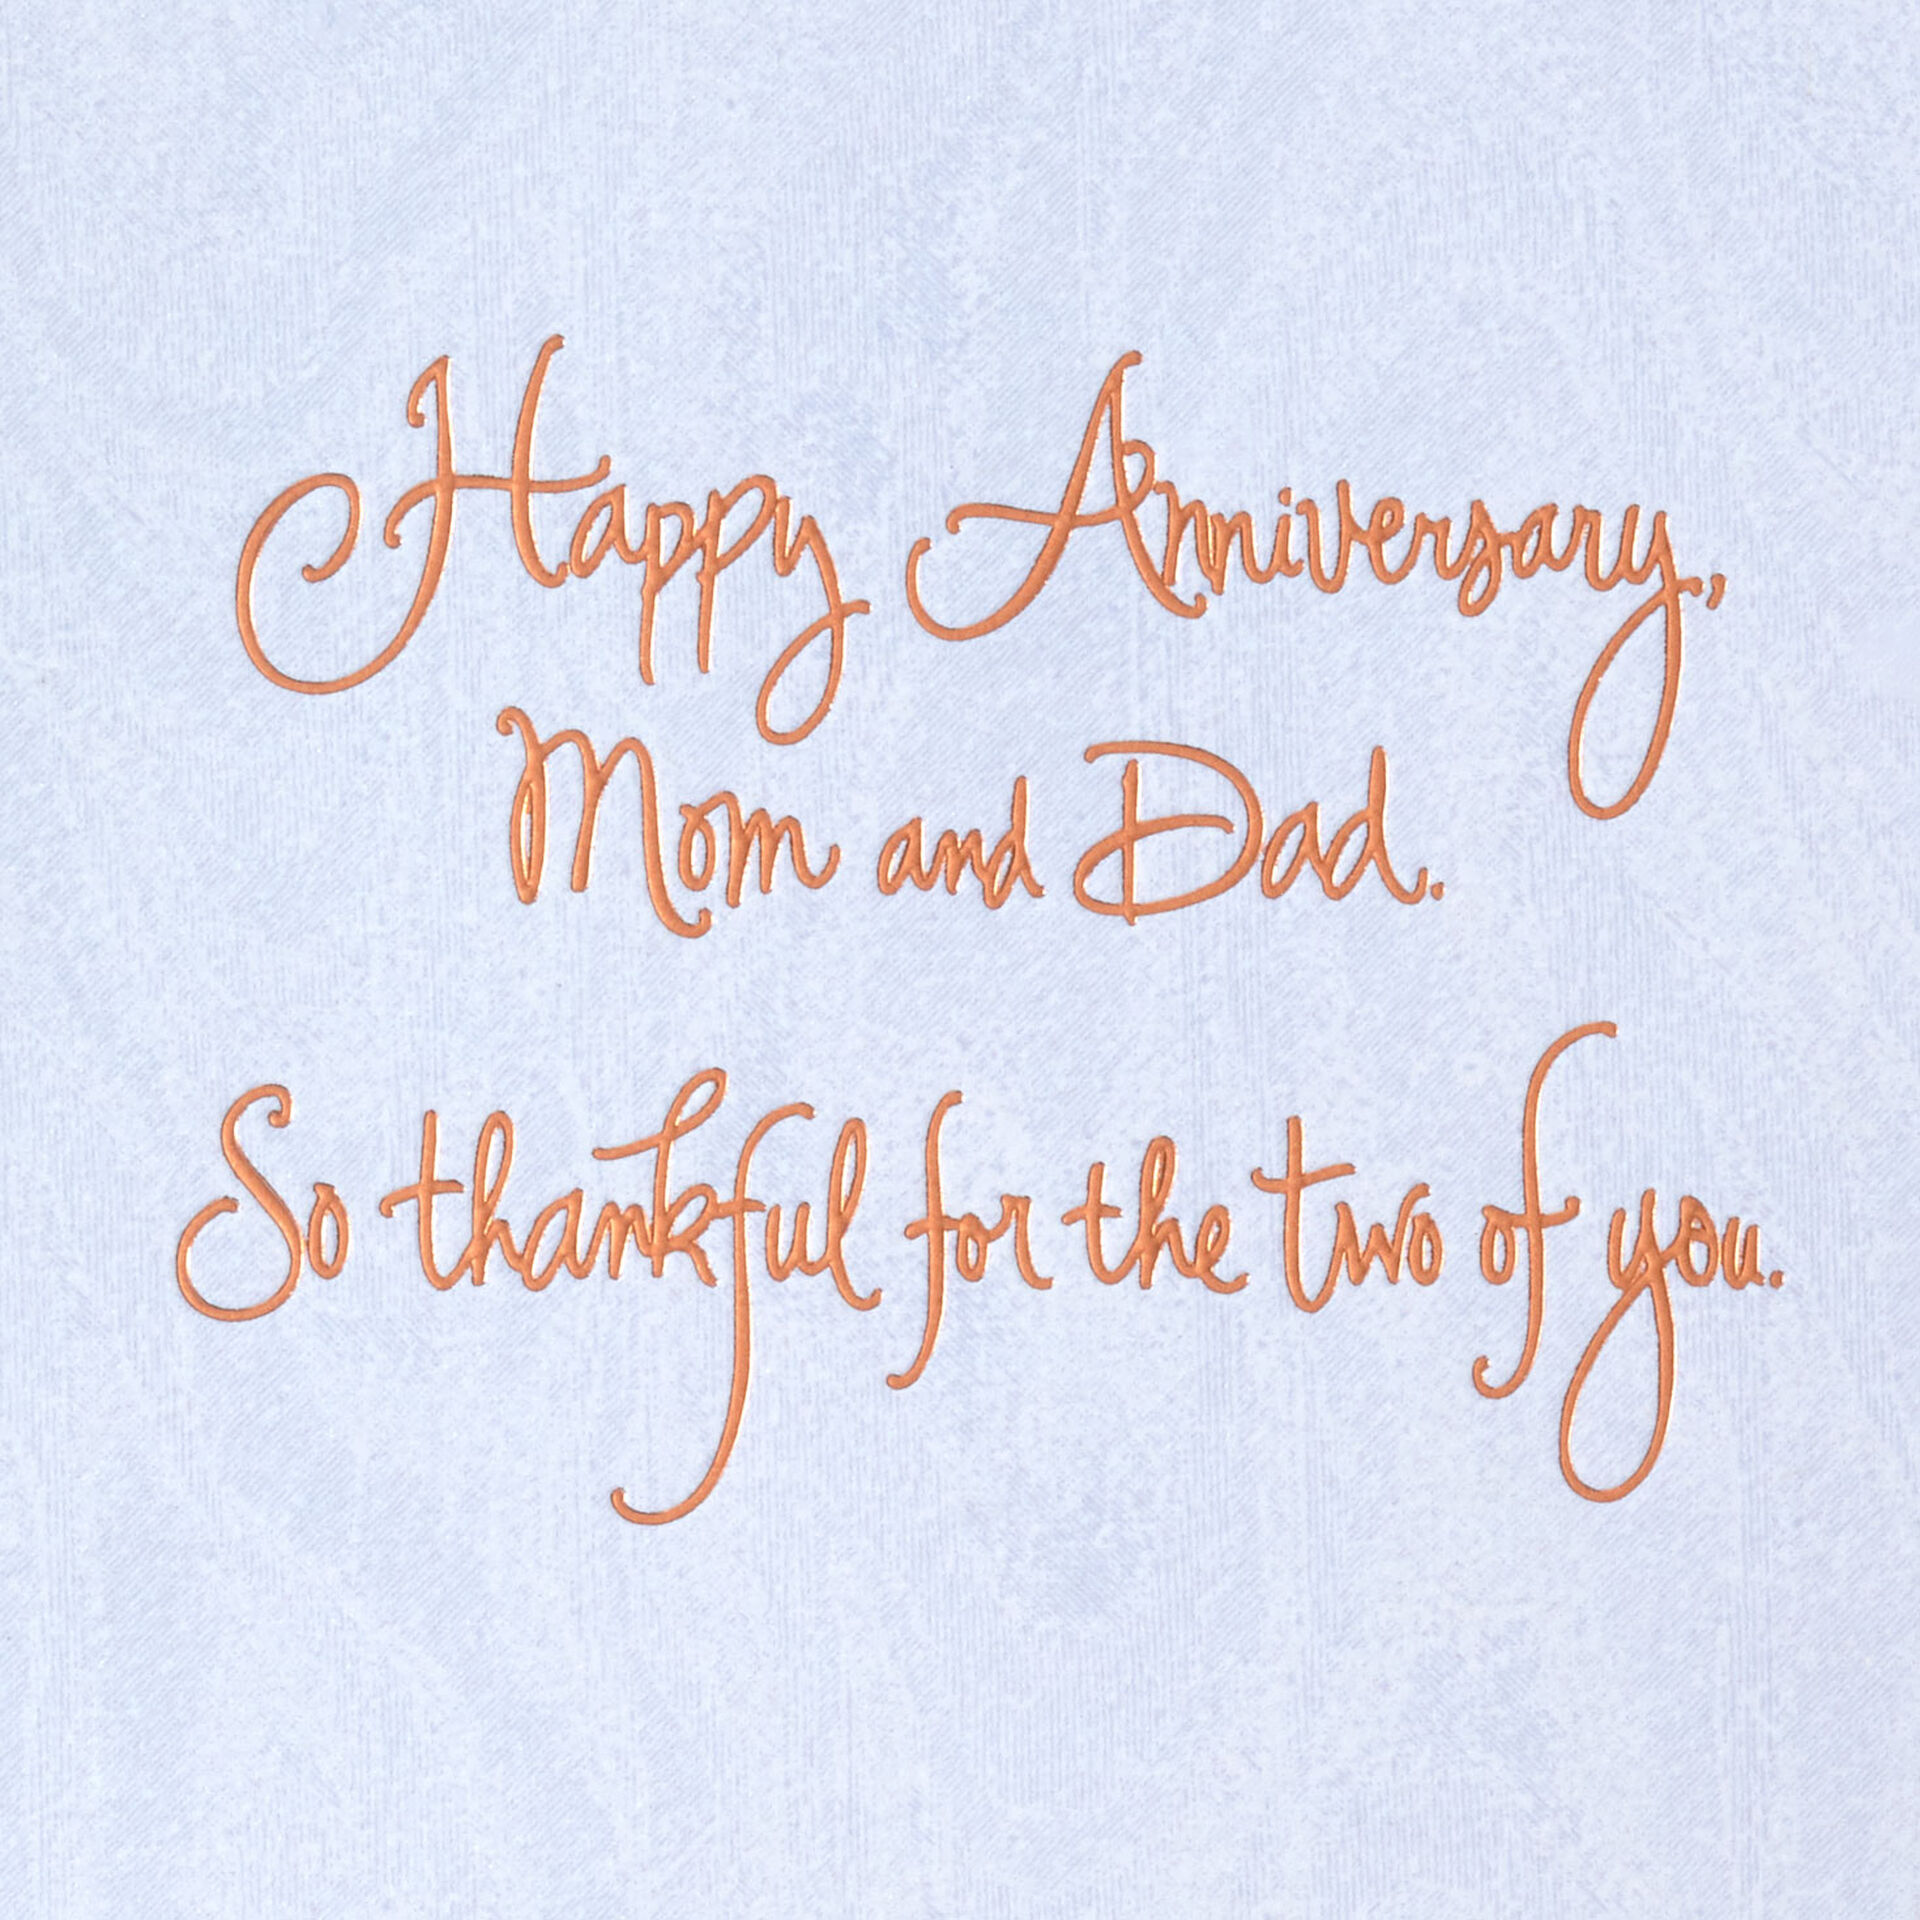 Two-Hearts-and-Flowers-Anniversary-Card-for-Mom-and-Dad_499AVY9956_02